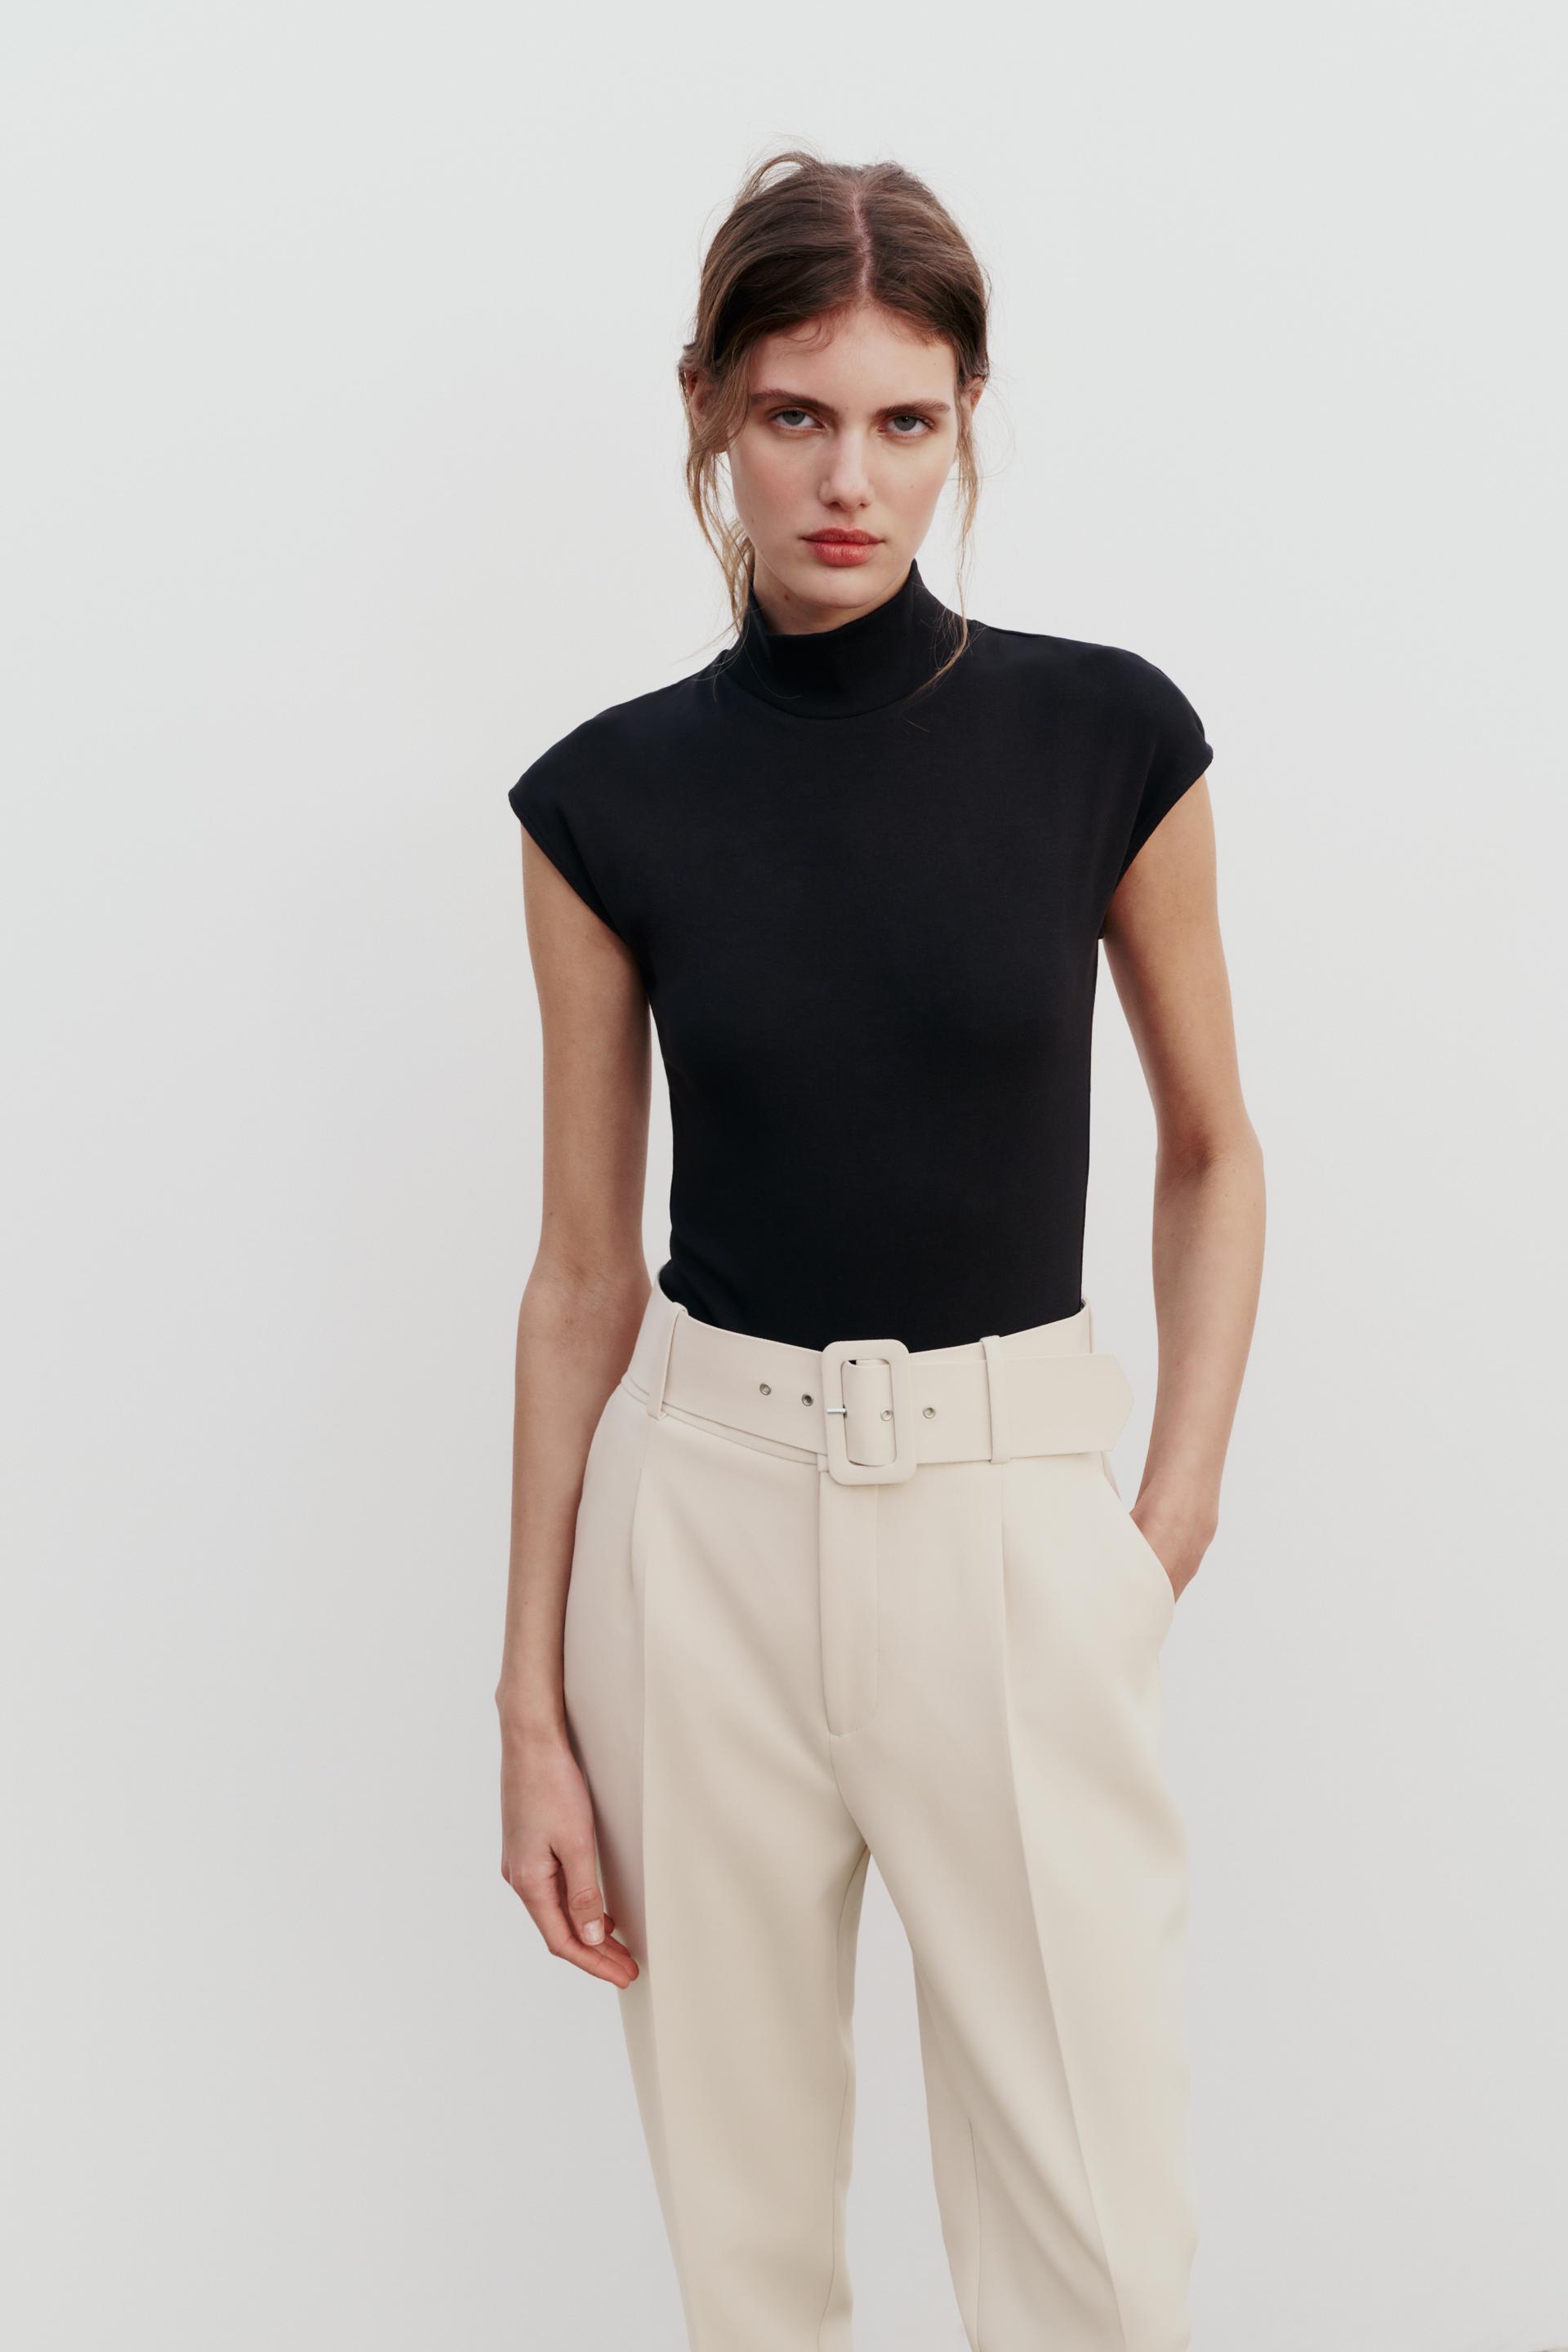 Zara Buttoned High-Waisted Belted Pants NWT Size Small 